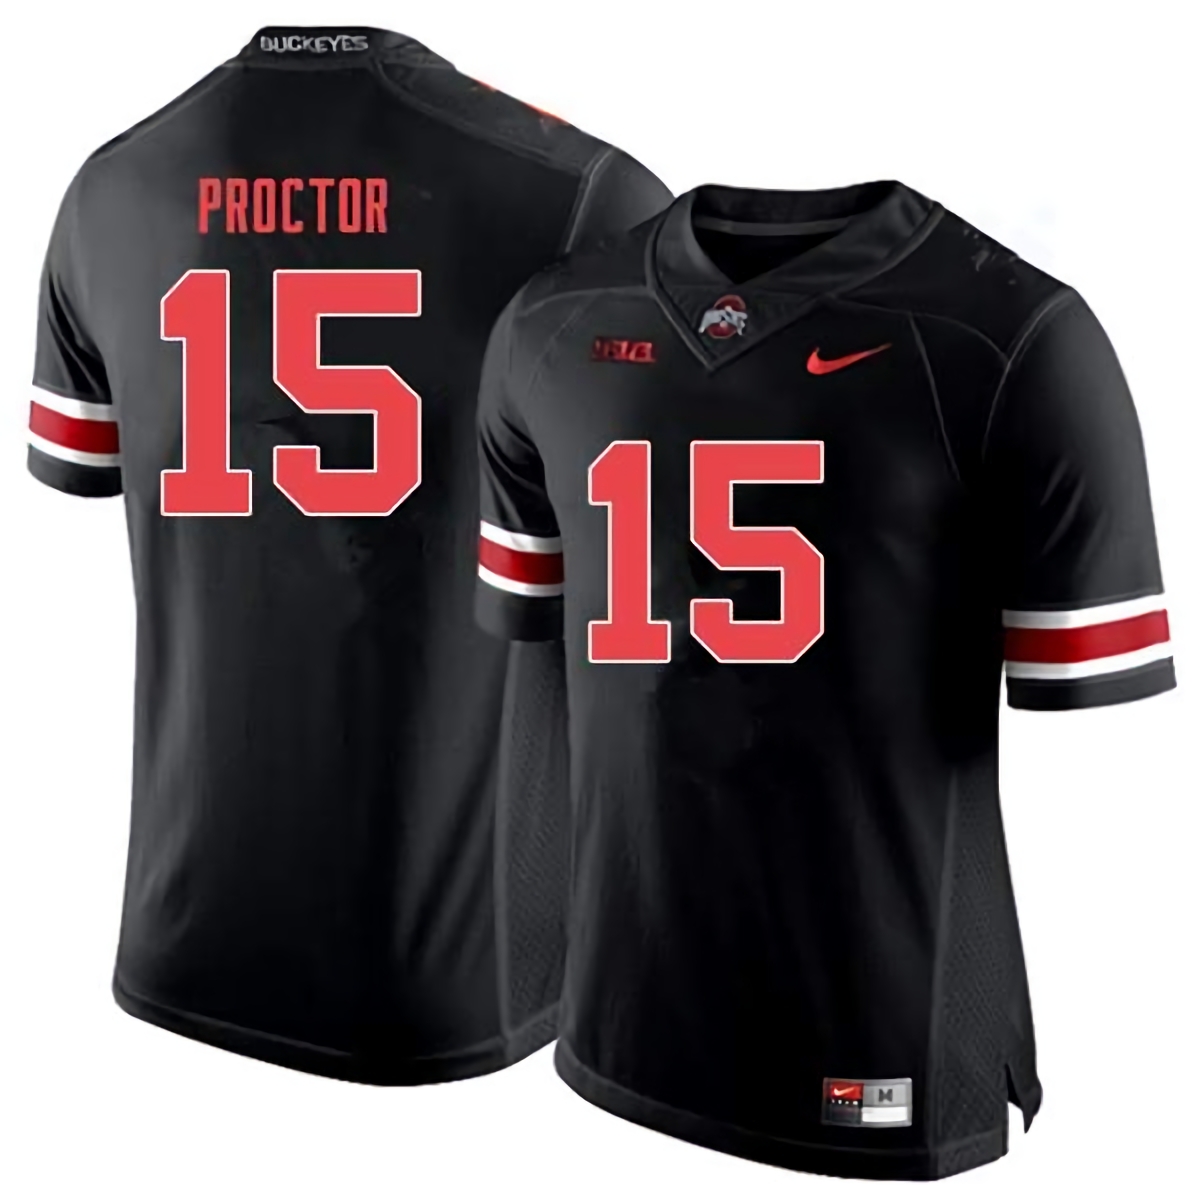 Josh Proctor Ohio State Buckeyes Men's NCAA #15 Nike Black Out College Stitched Football Jersey LBL8556BJ